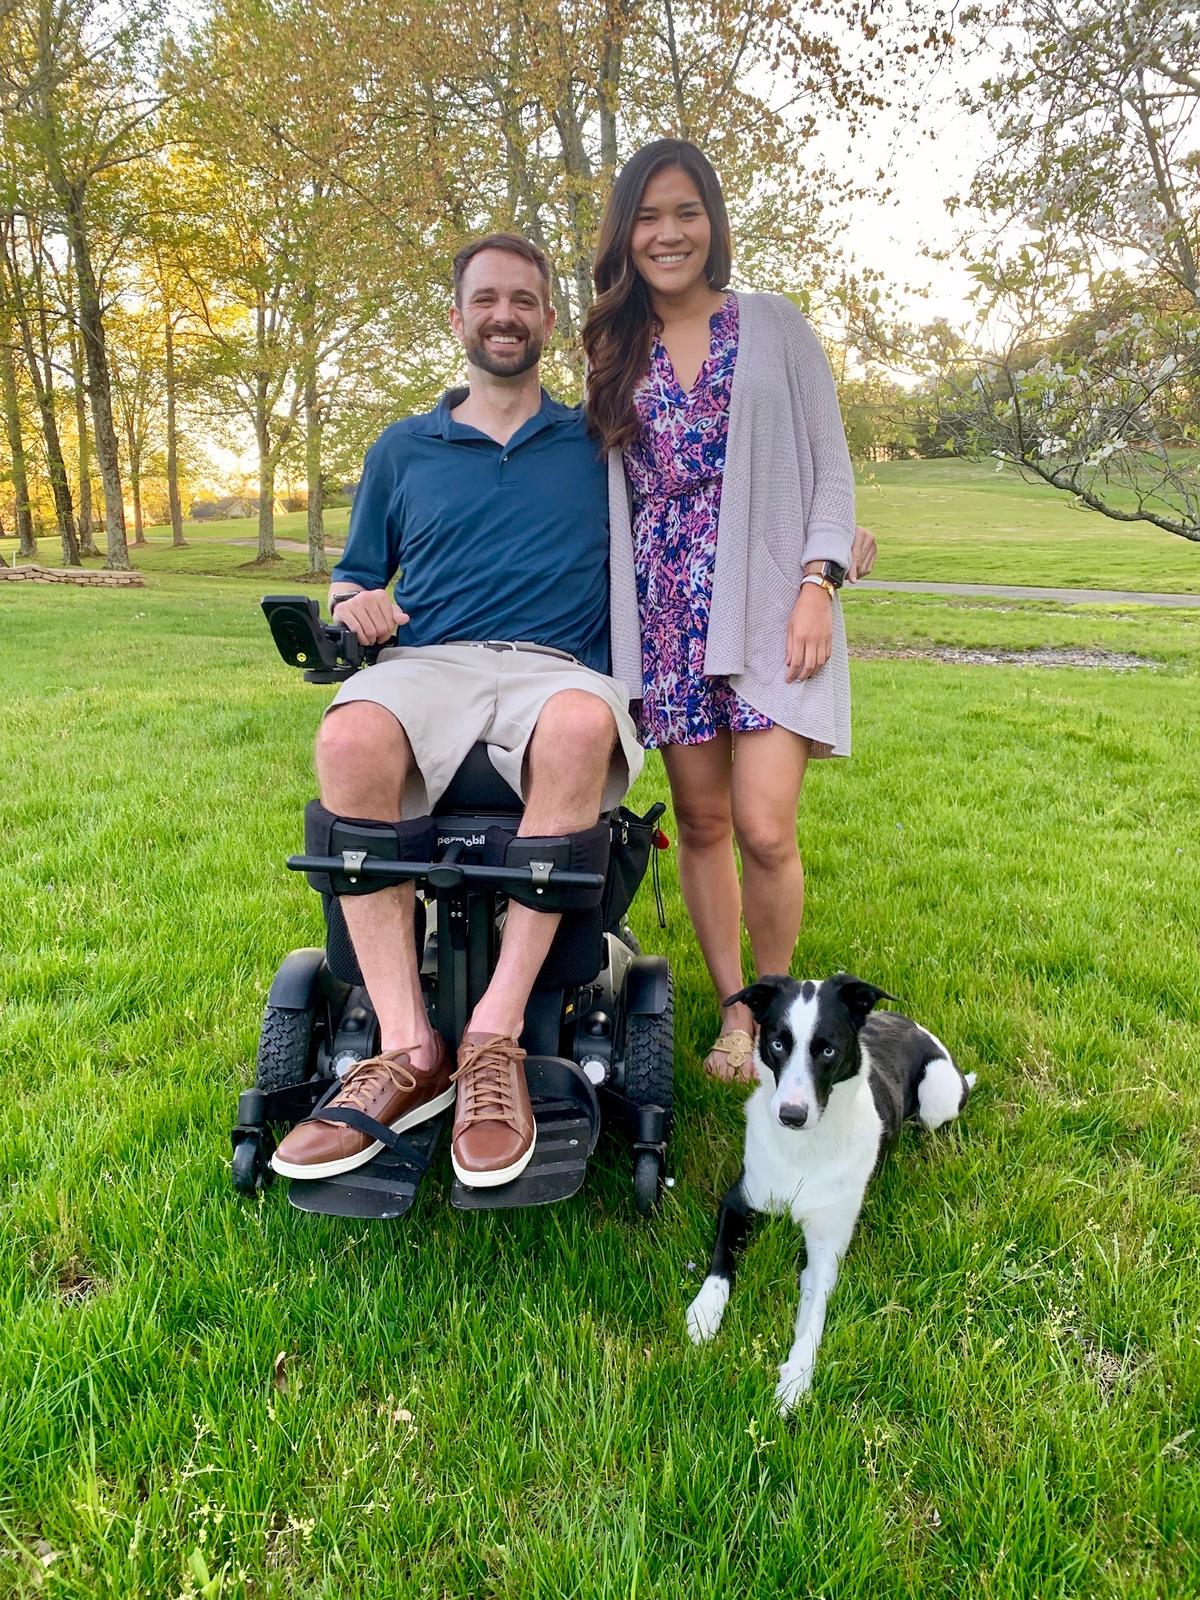 The couple, who met each other for the first time in August 2018, say they believe in staying positive and spreading love. (Courtesy of <a href="https://positivelyparalyzed.org/">Hanna and Jerod Nieder</a>)